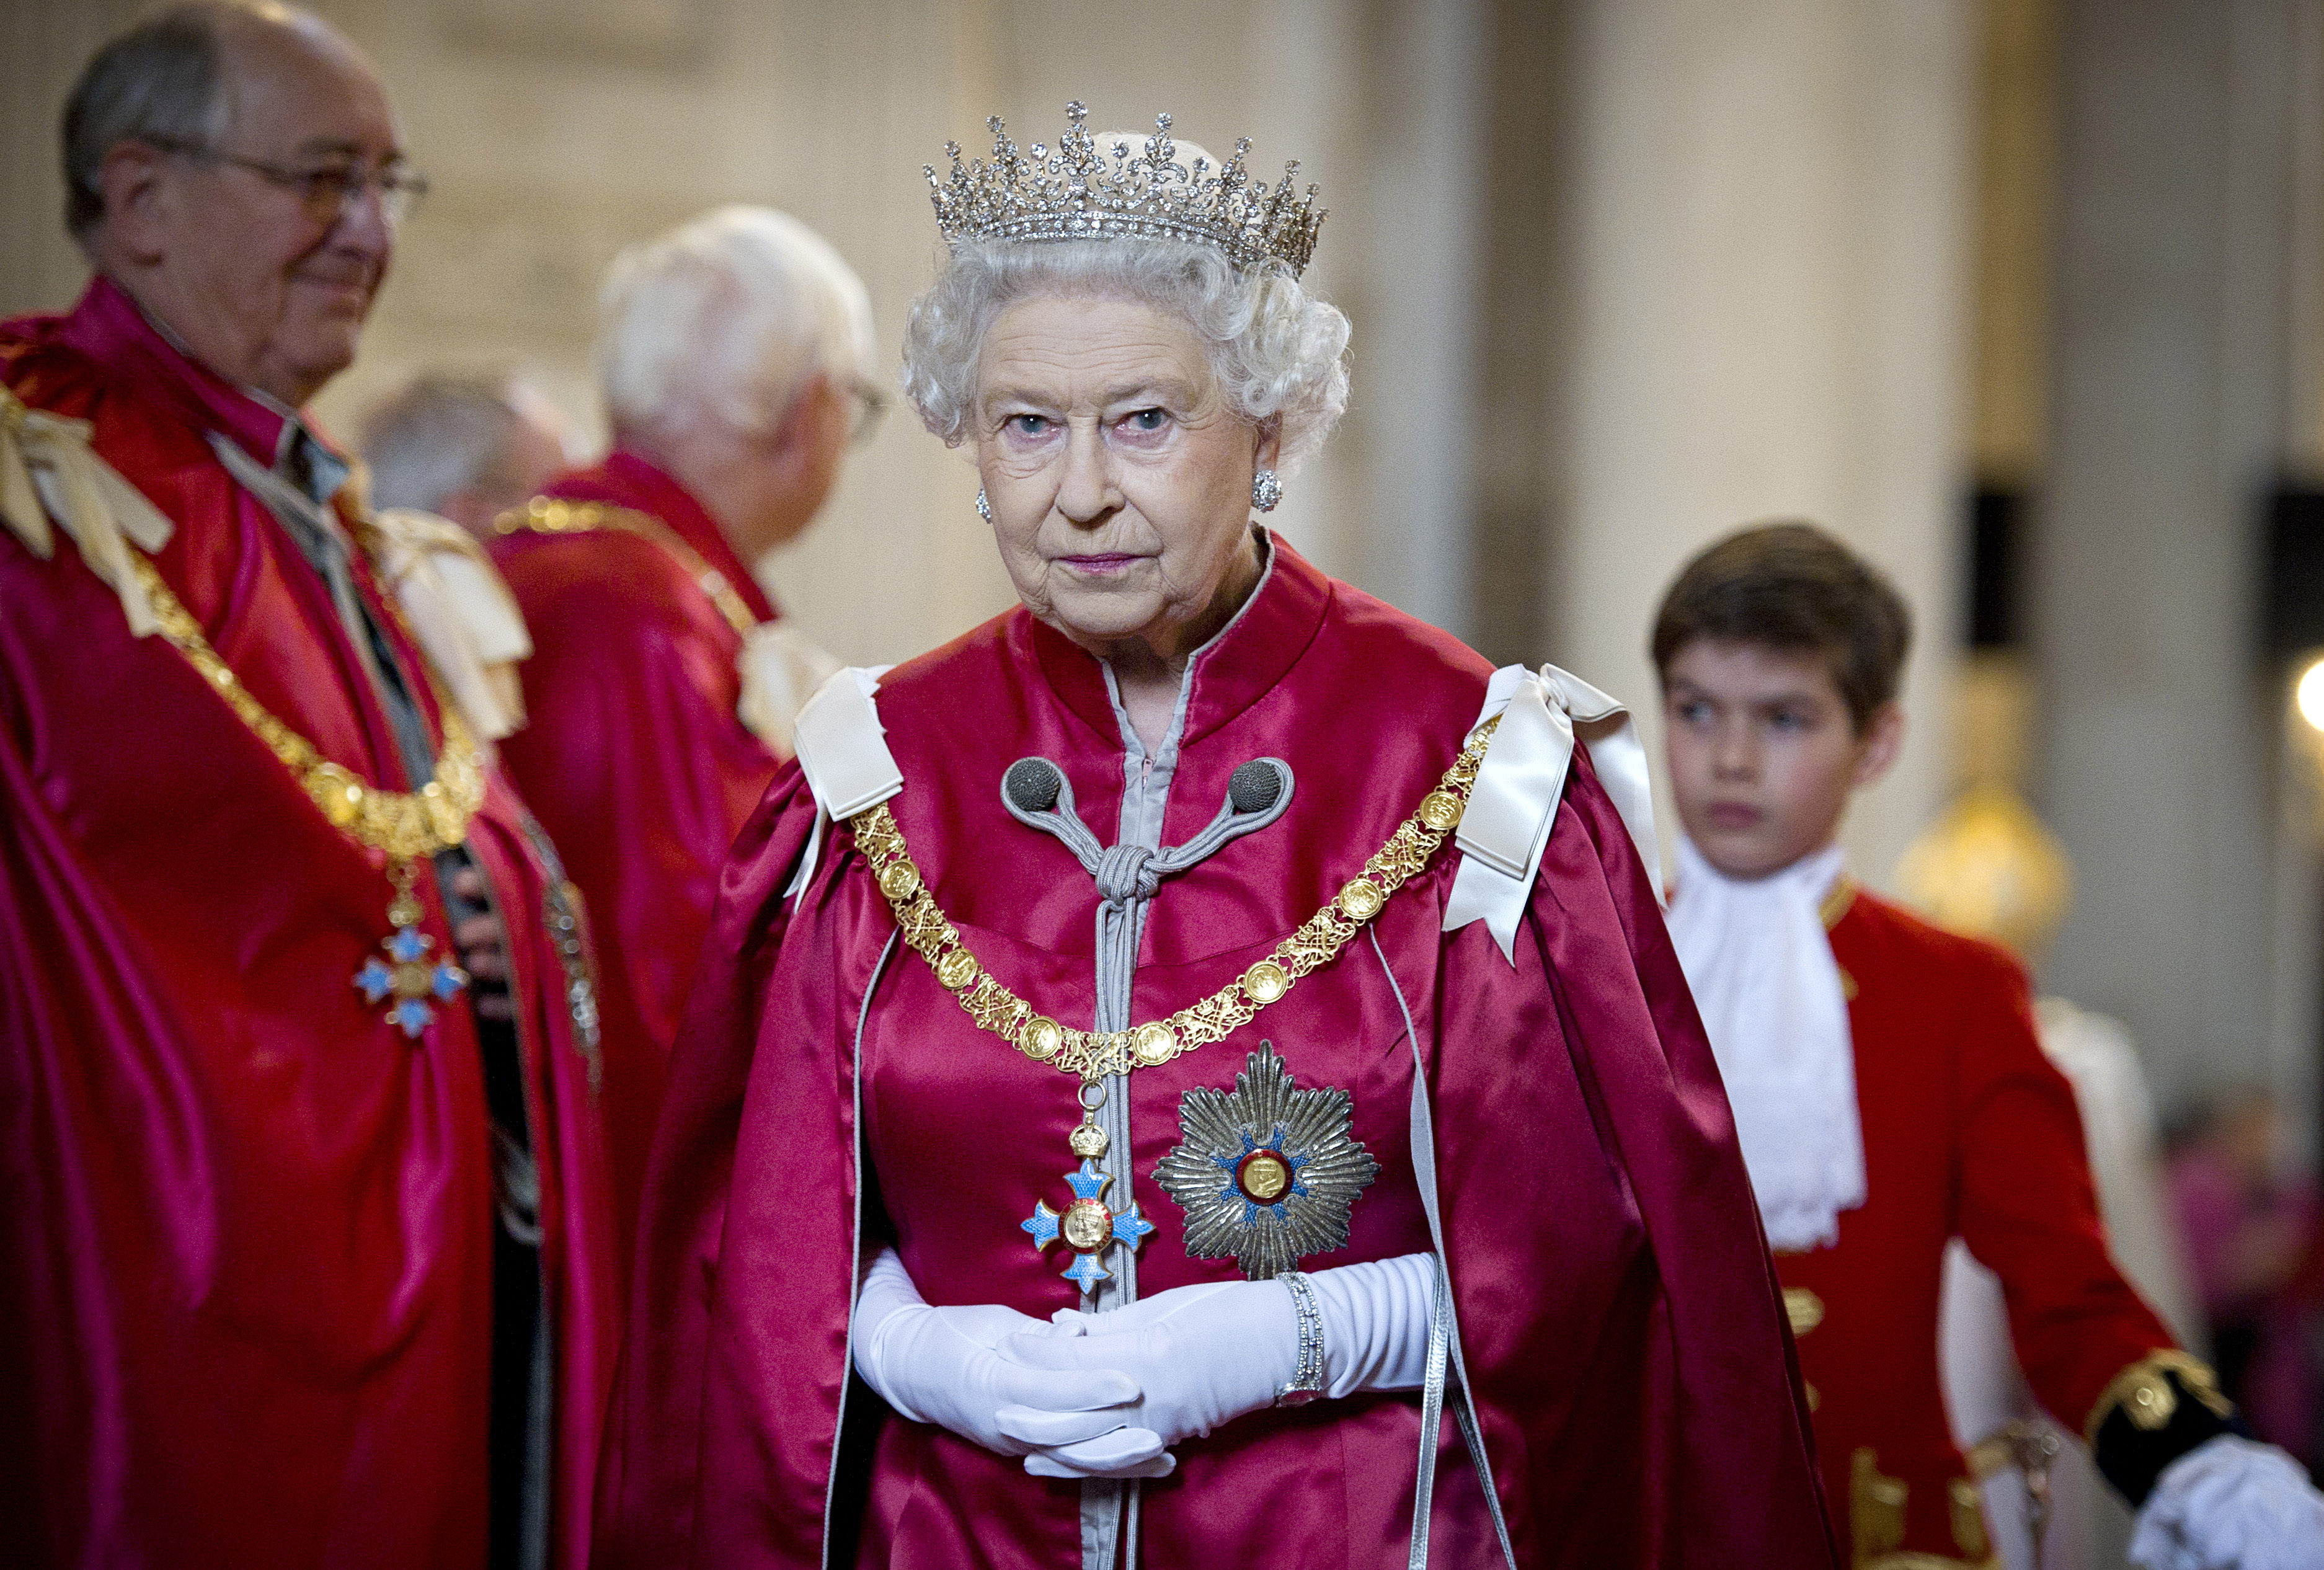 Queen Elizabeth II at the Order of the British Empire ceremony in London, England on March 7, 2012 | Source: Getty Images